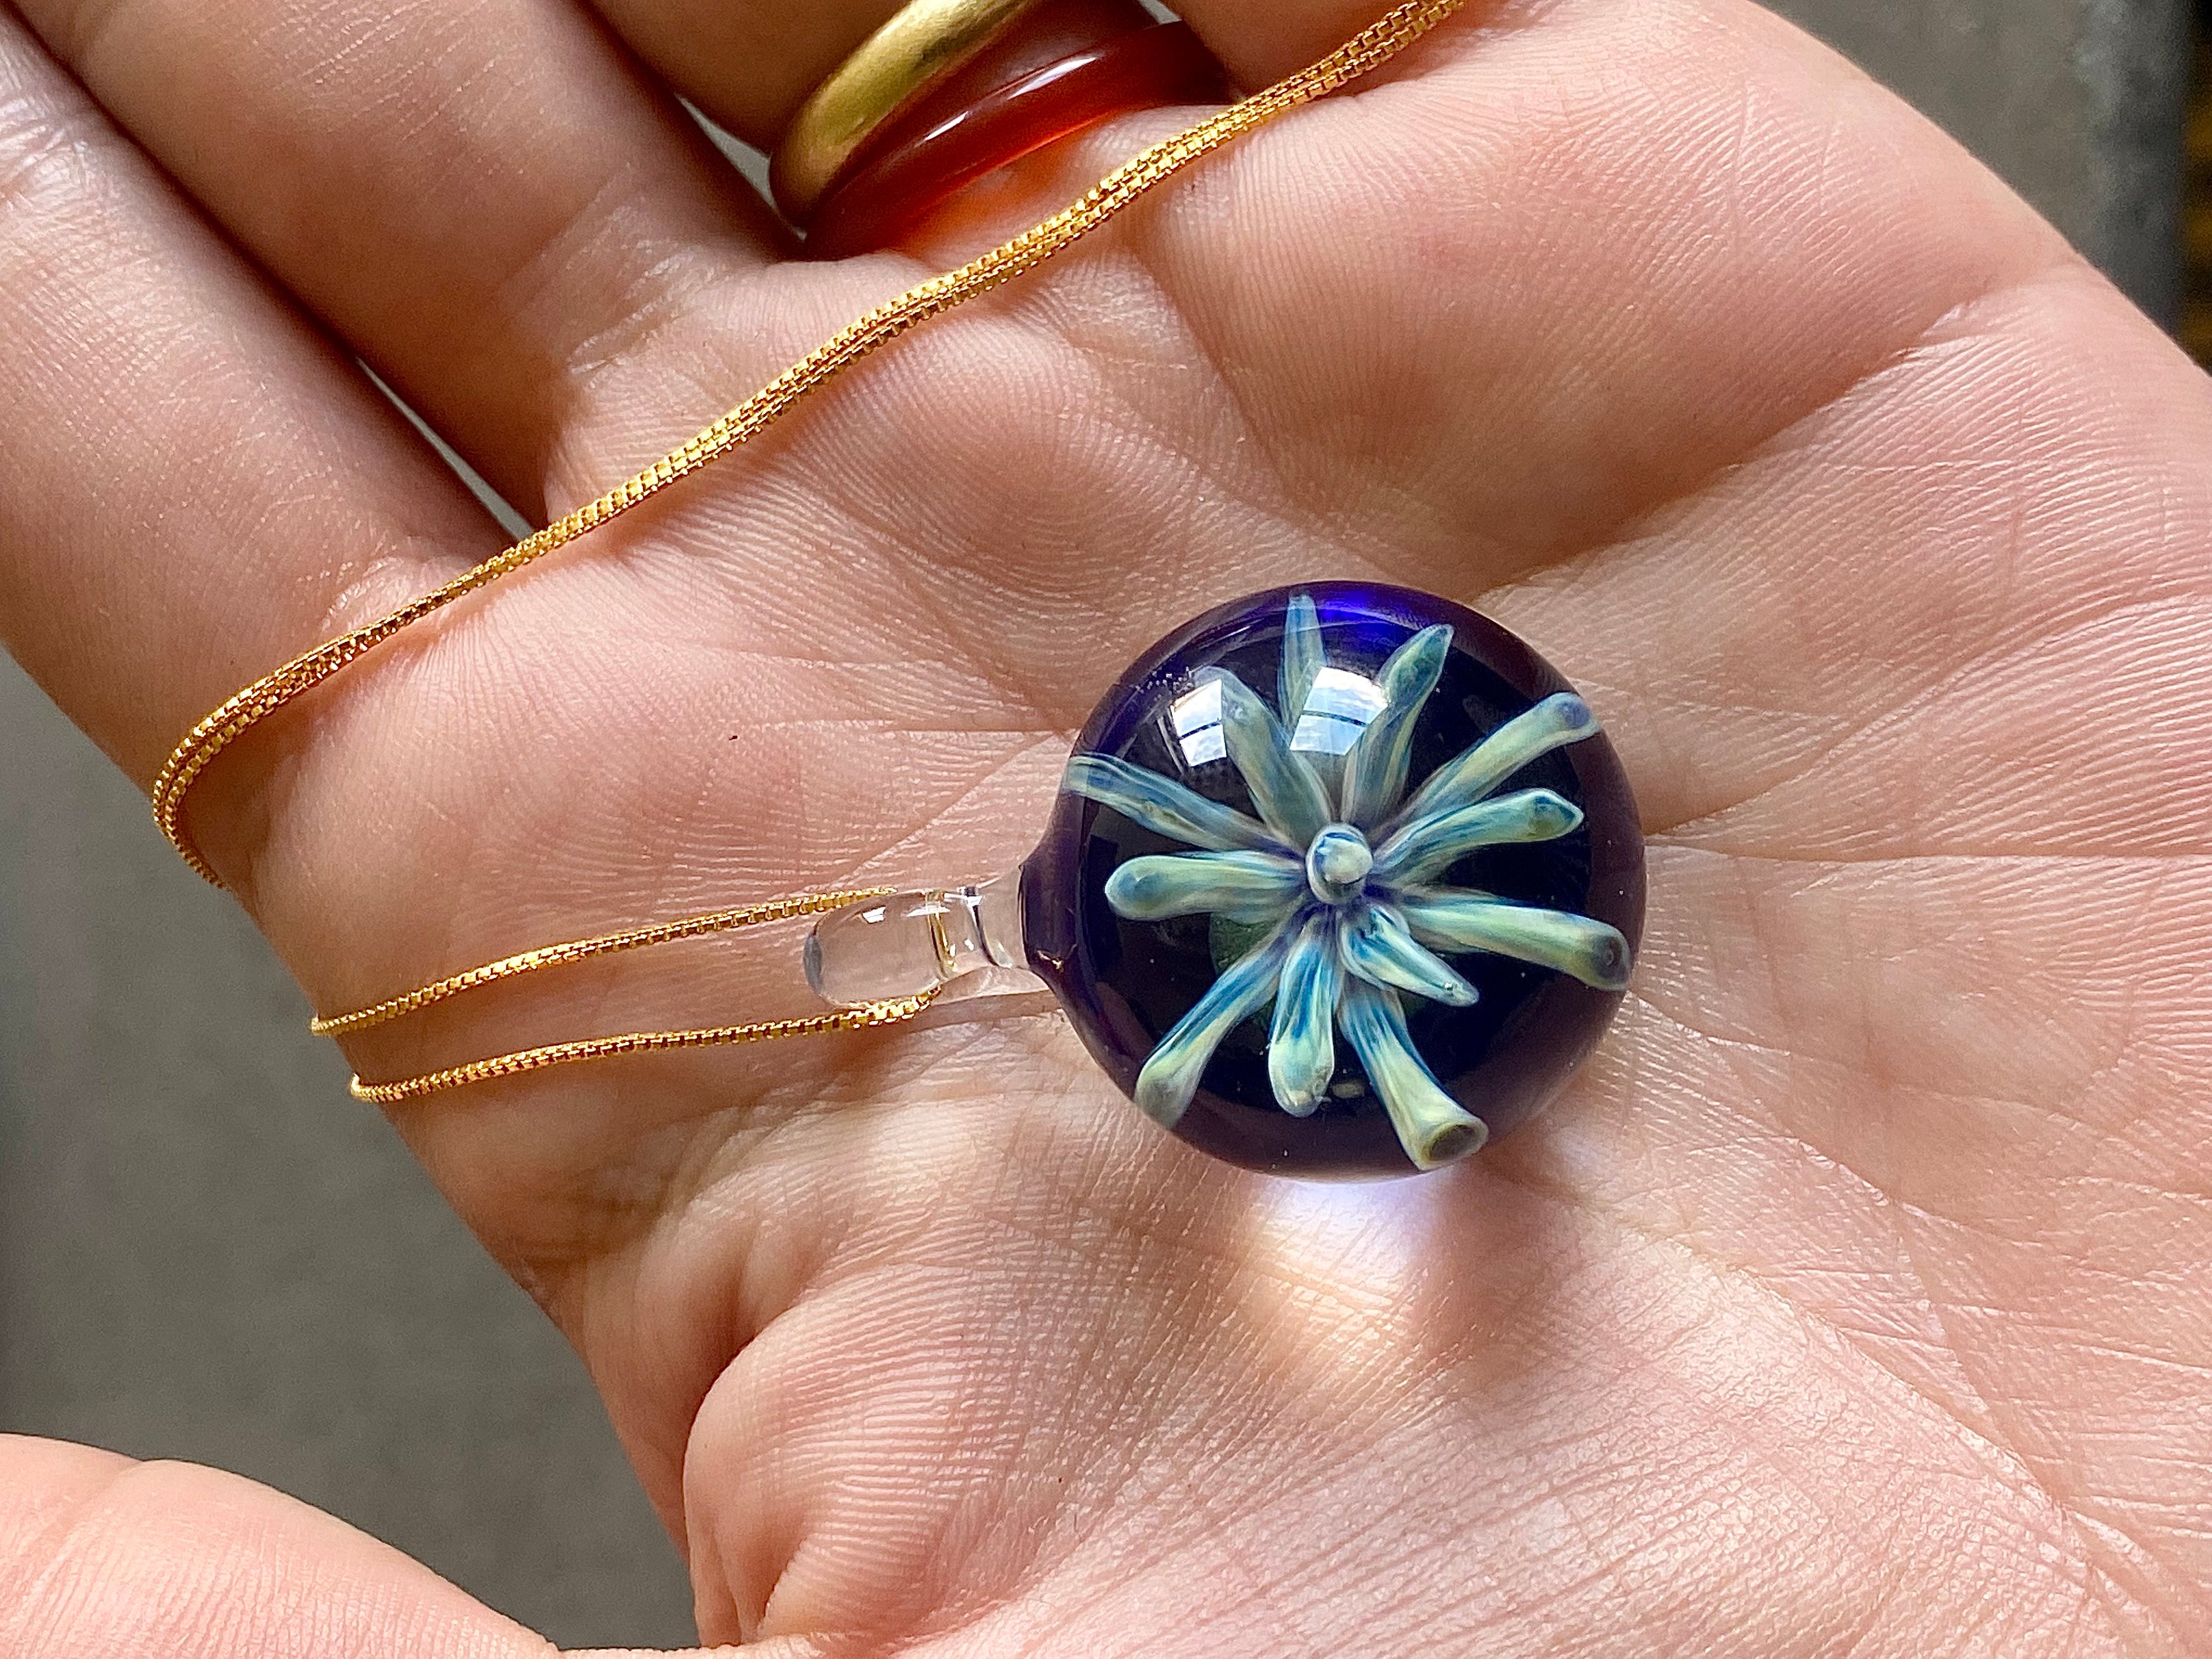 Green and Blue Flower Implosion Pendant